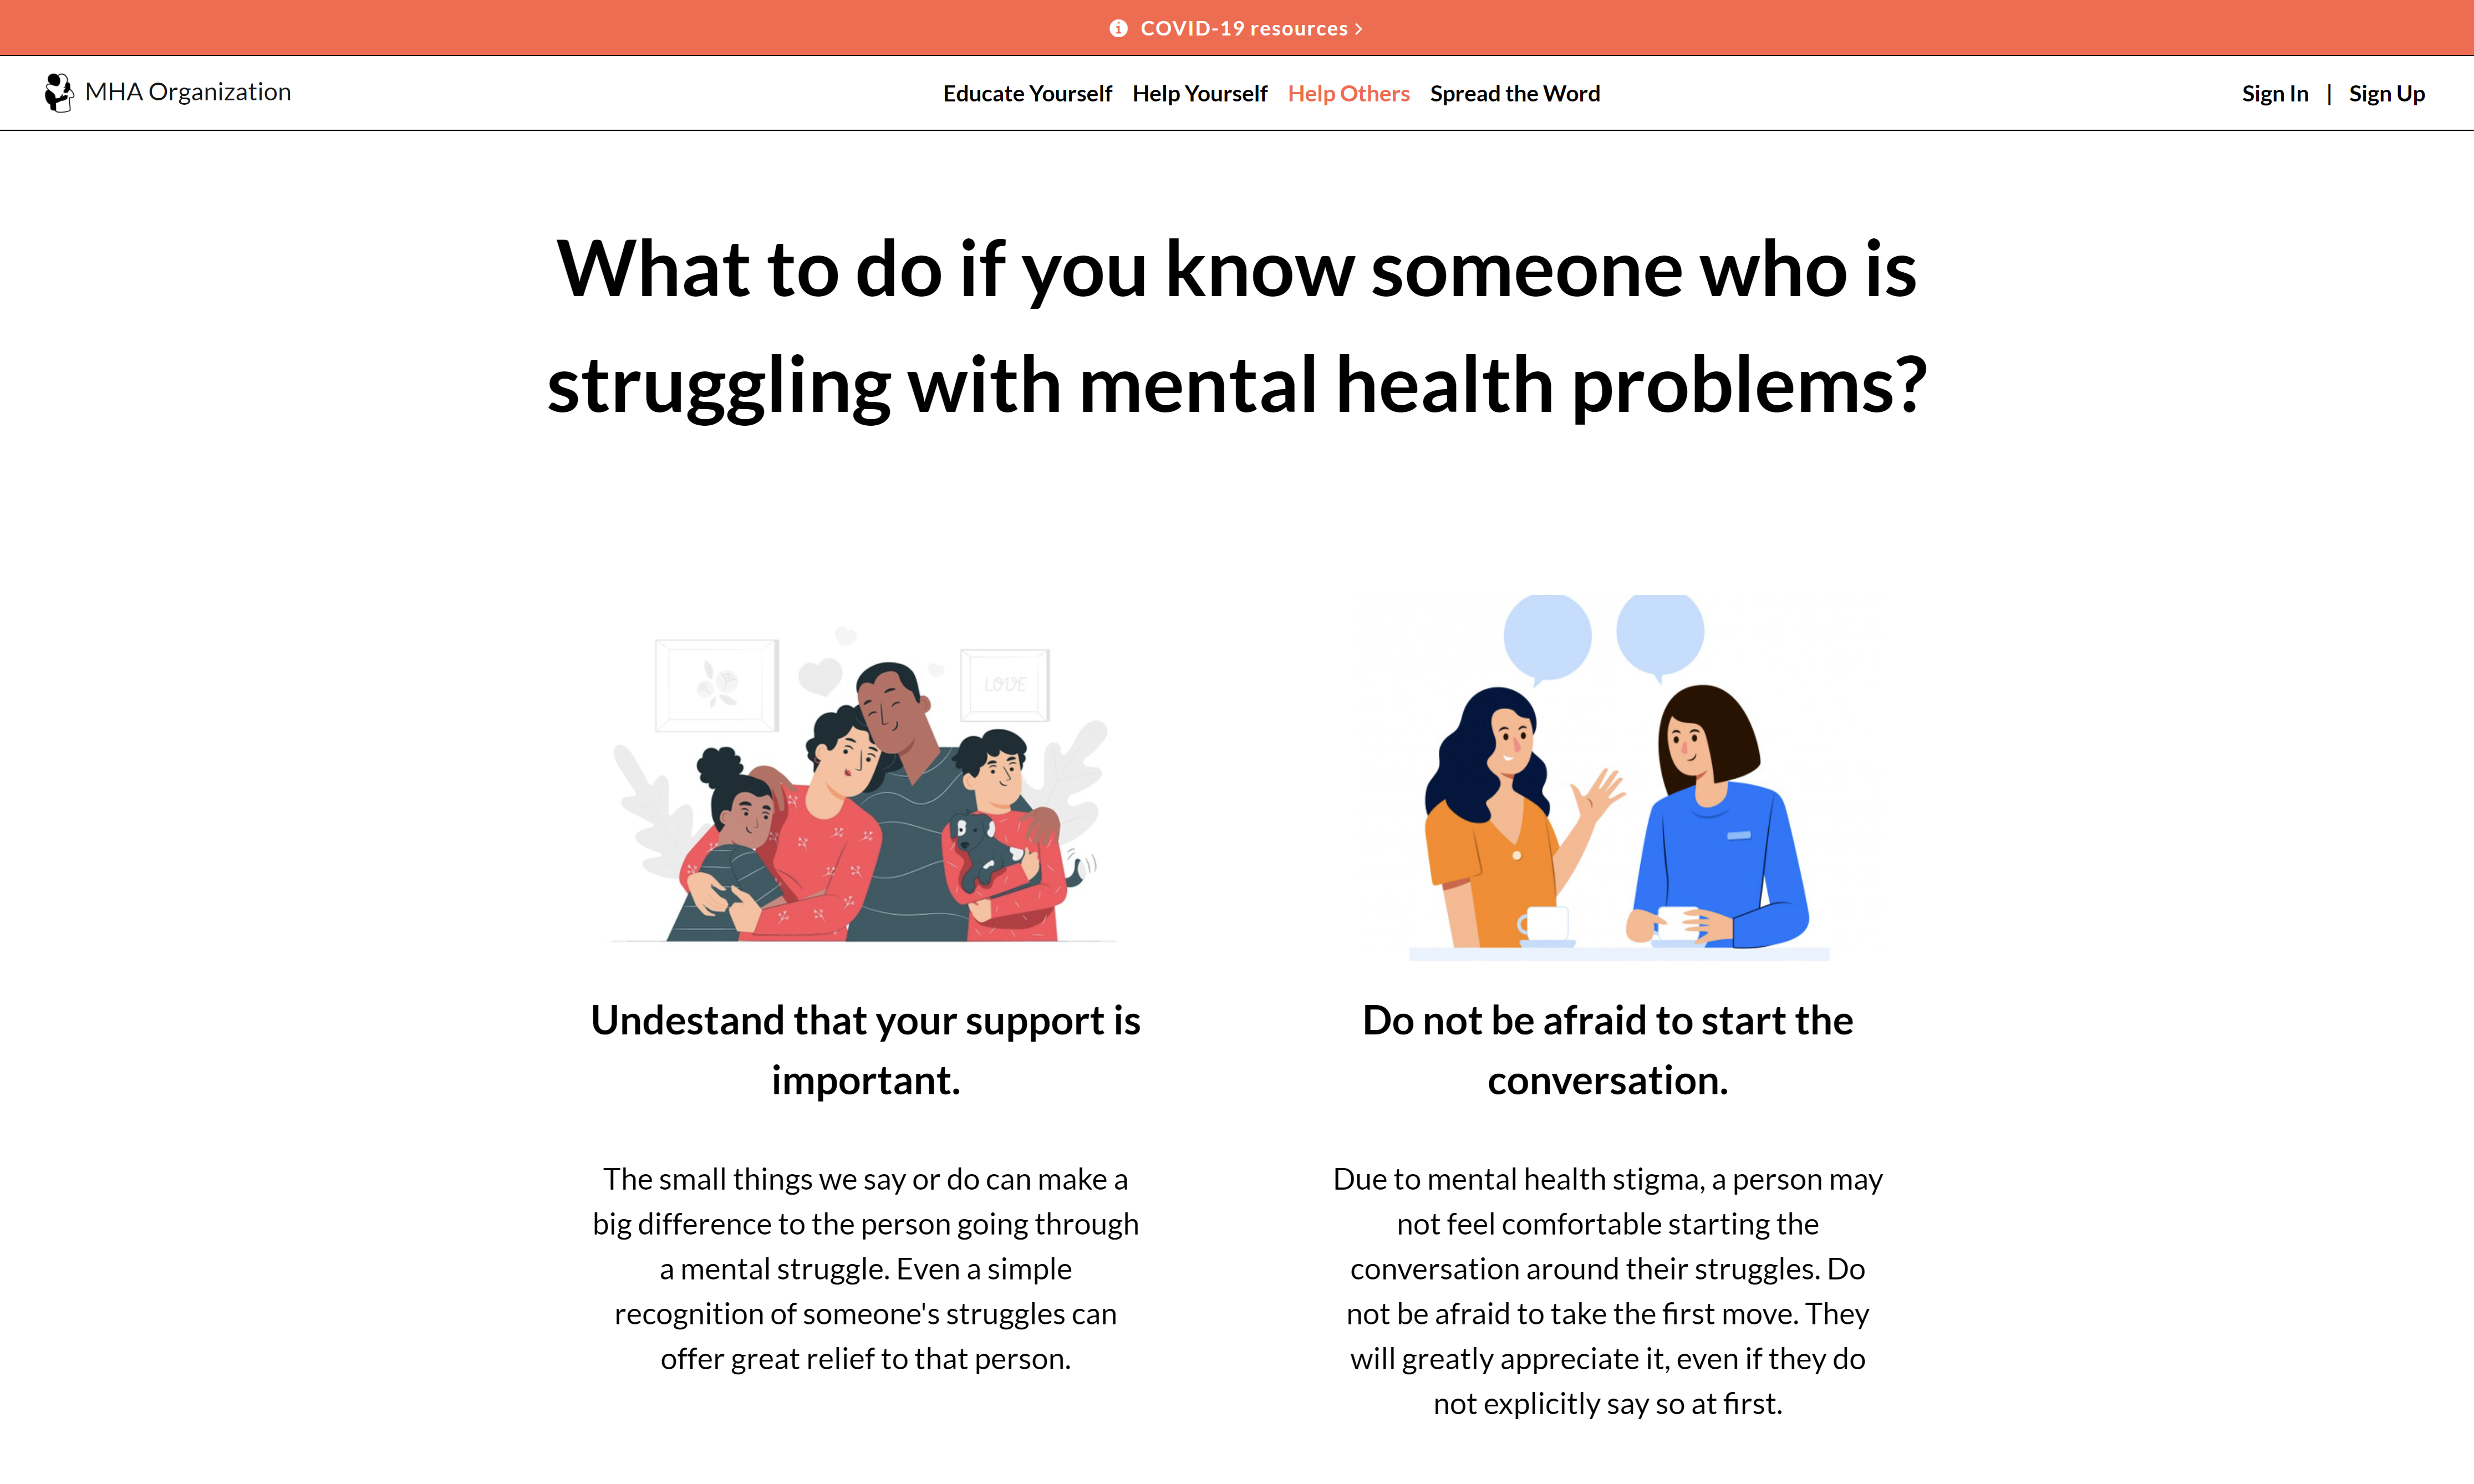 Image showing the first part of the 'Acquaintance Struggling' section of the 'Help Others' page